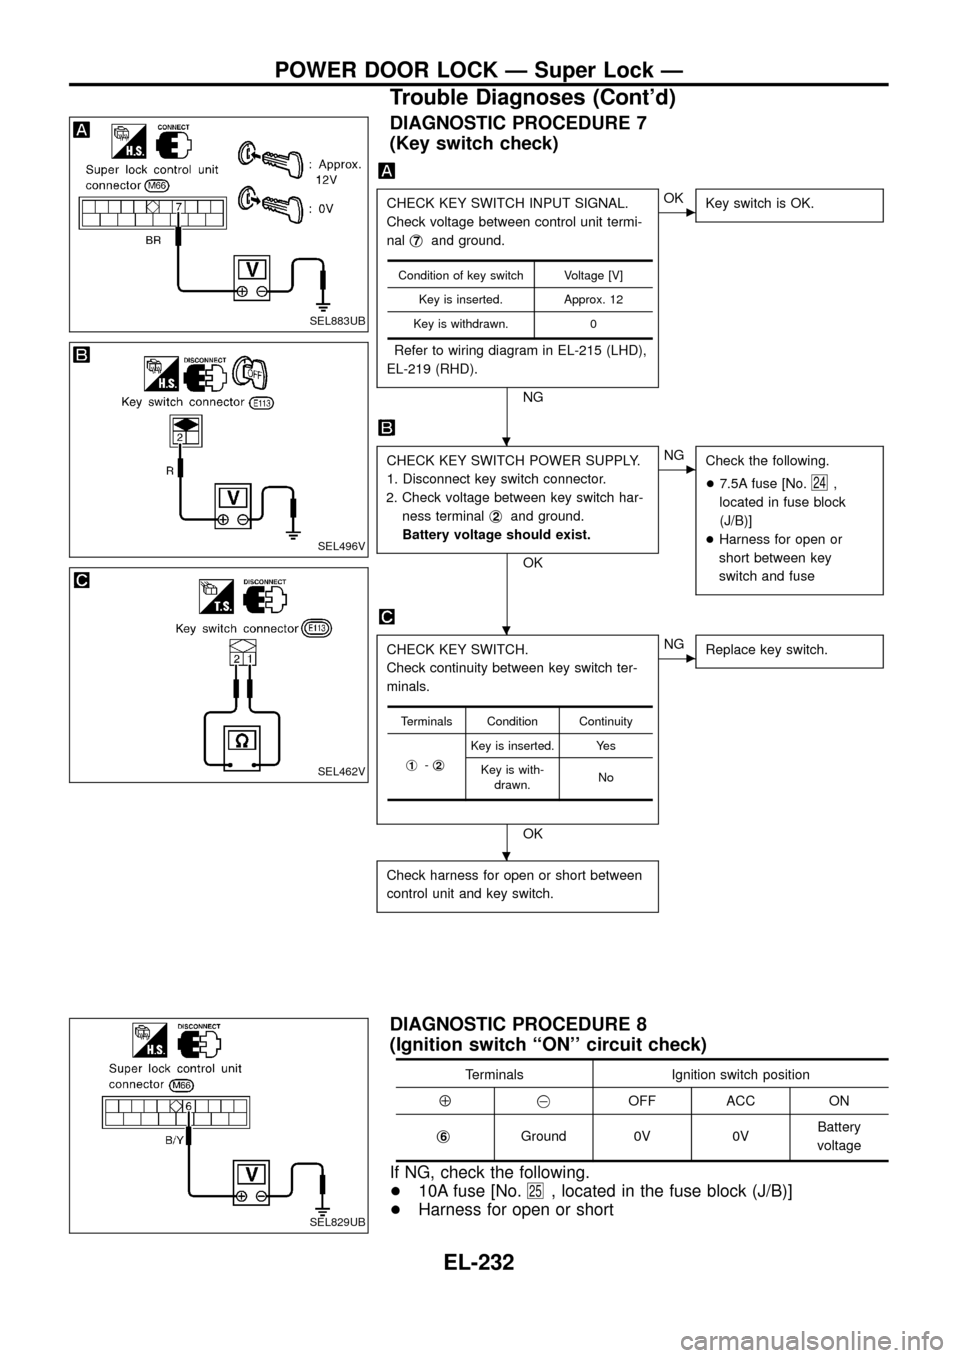 NISSAN PATROL 1998 Y61 / 5.G Electrical System Owners Guide DIAGNOSTIC PROCEDURE 7
(Key switch check)
CHECK KEY SWITCH INPUT SIGNAL.
Check voltage between control unit termi-
nalj
7and ground.
Refer to wiring diagram in EL-215 (LHD),
EL-219 (RHD).
NG
cOK
Key s